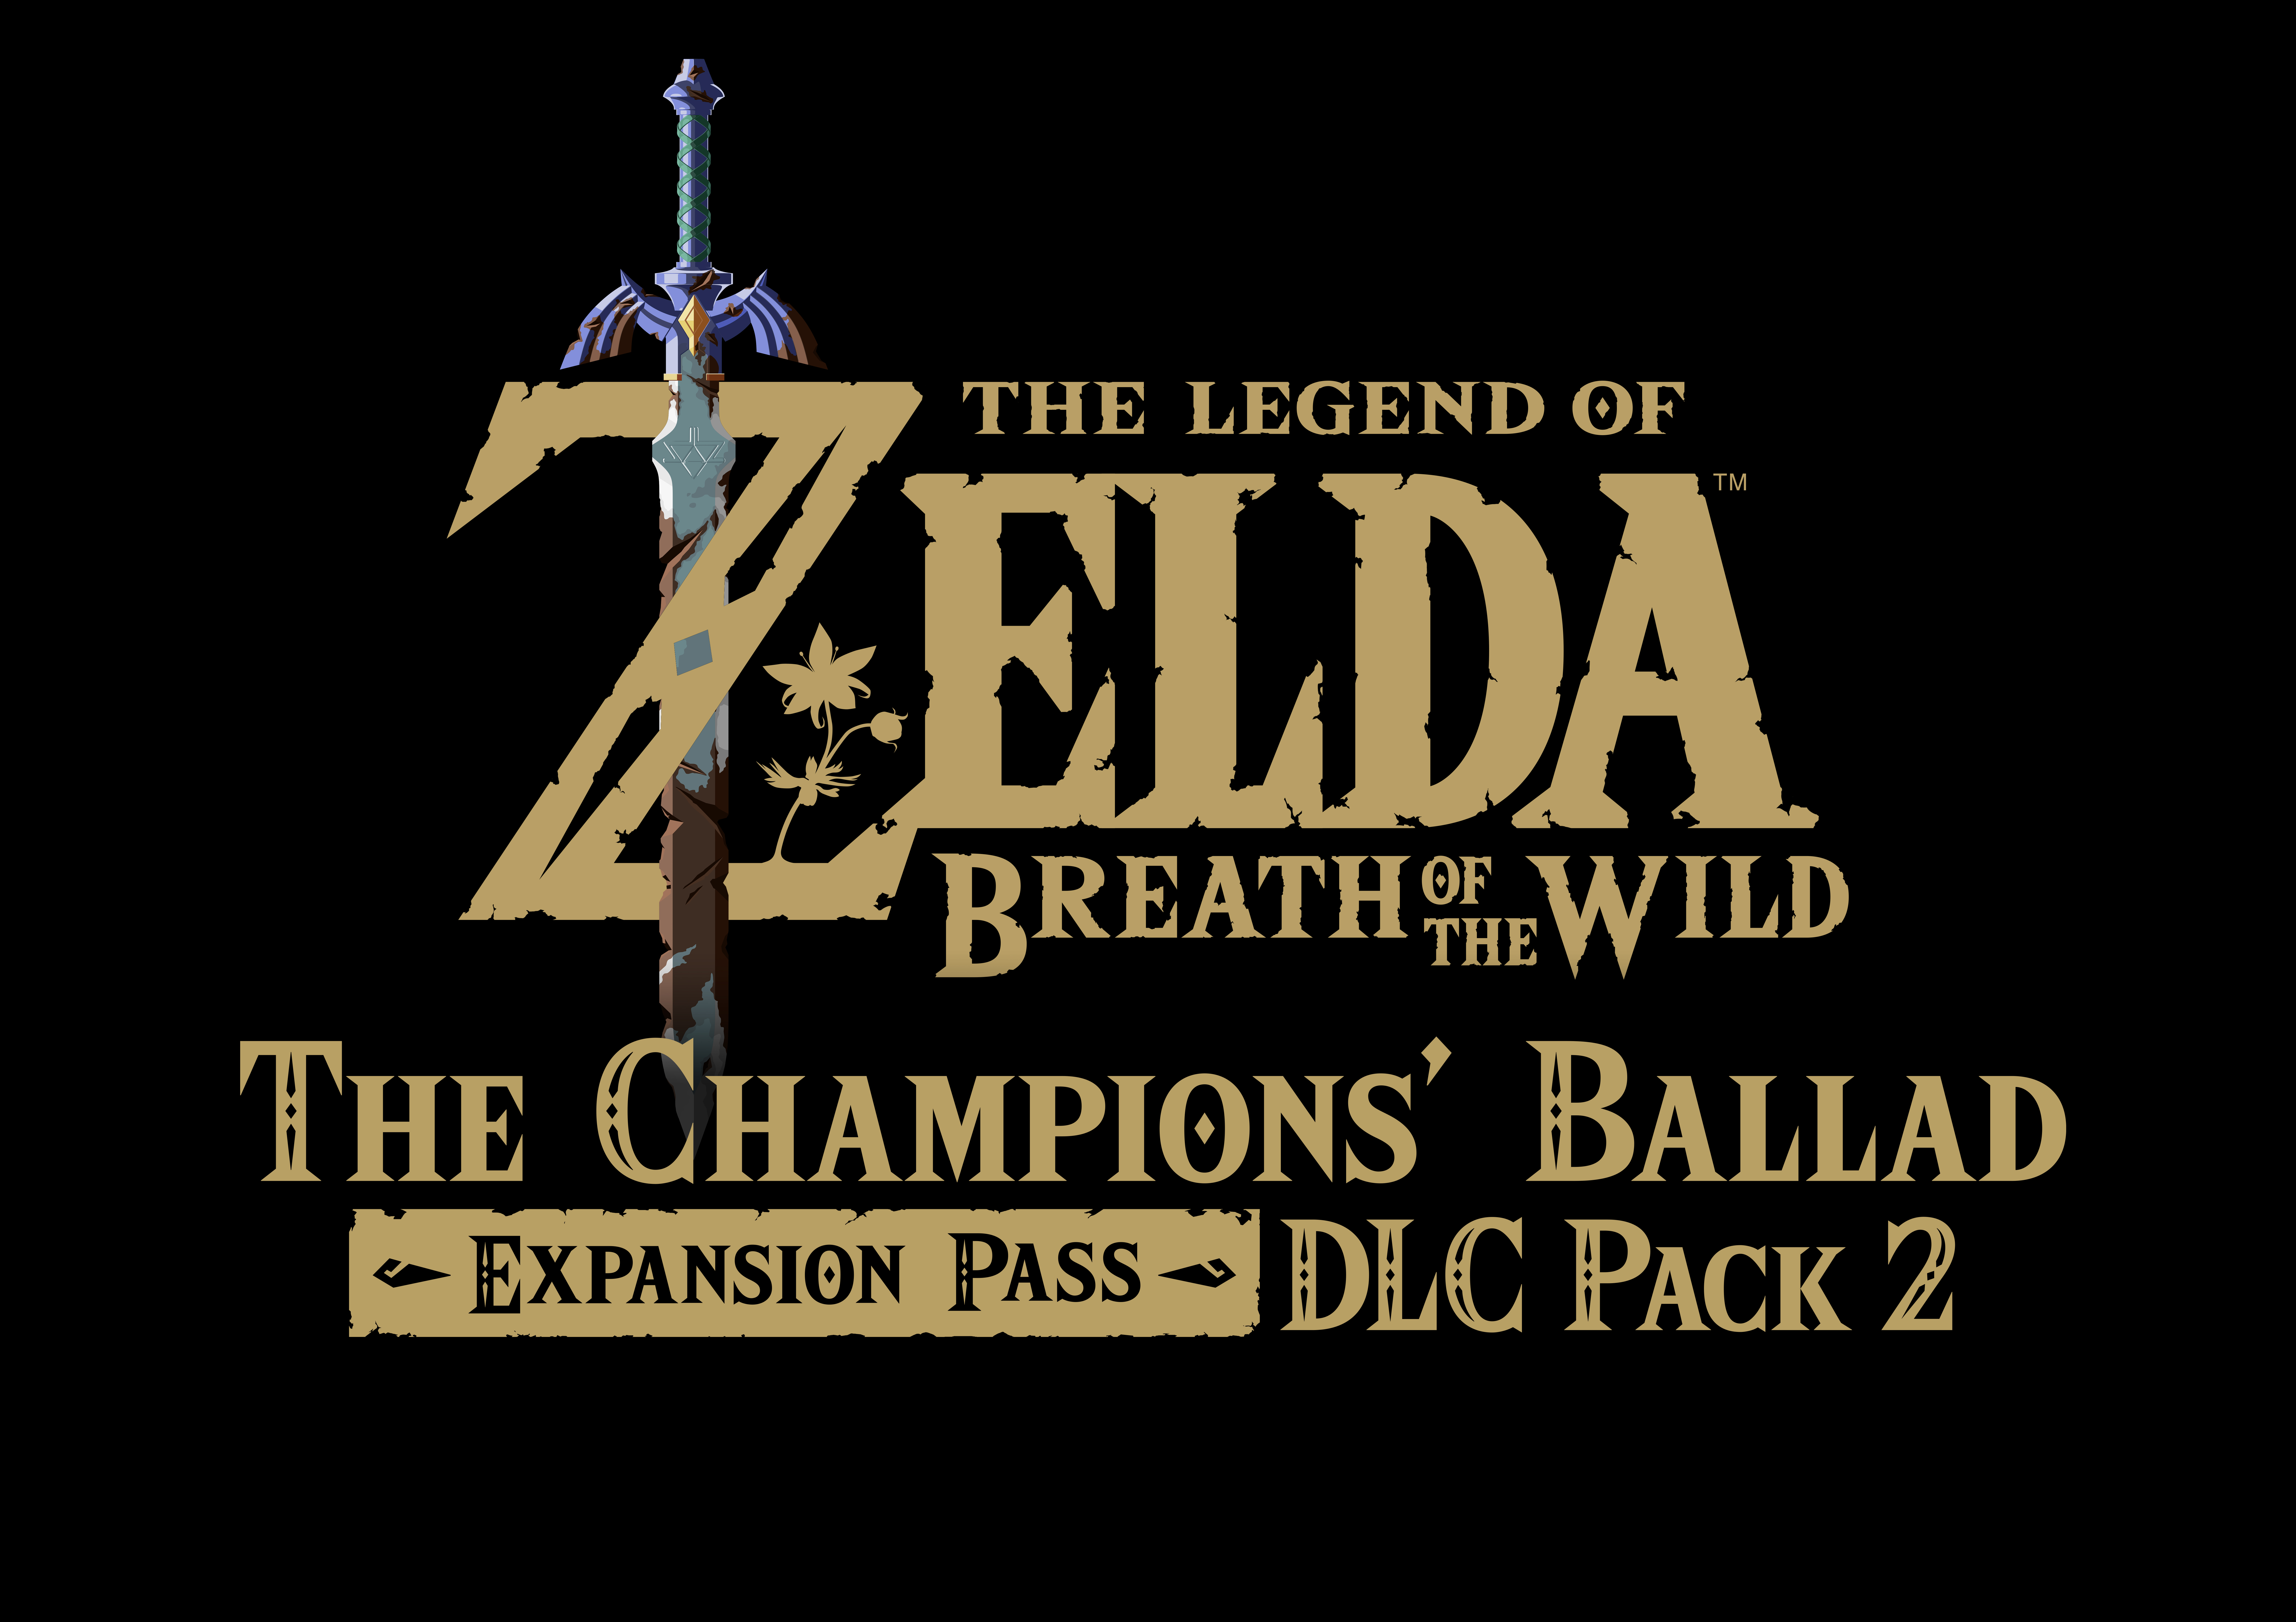 Newly announced Zelda: Breath of the Wild DLC and 'Expansion Pass